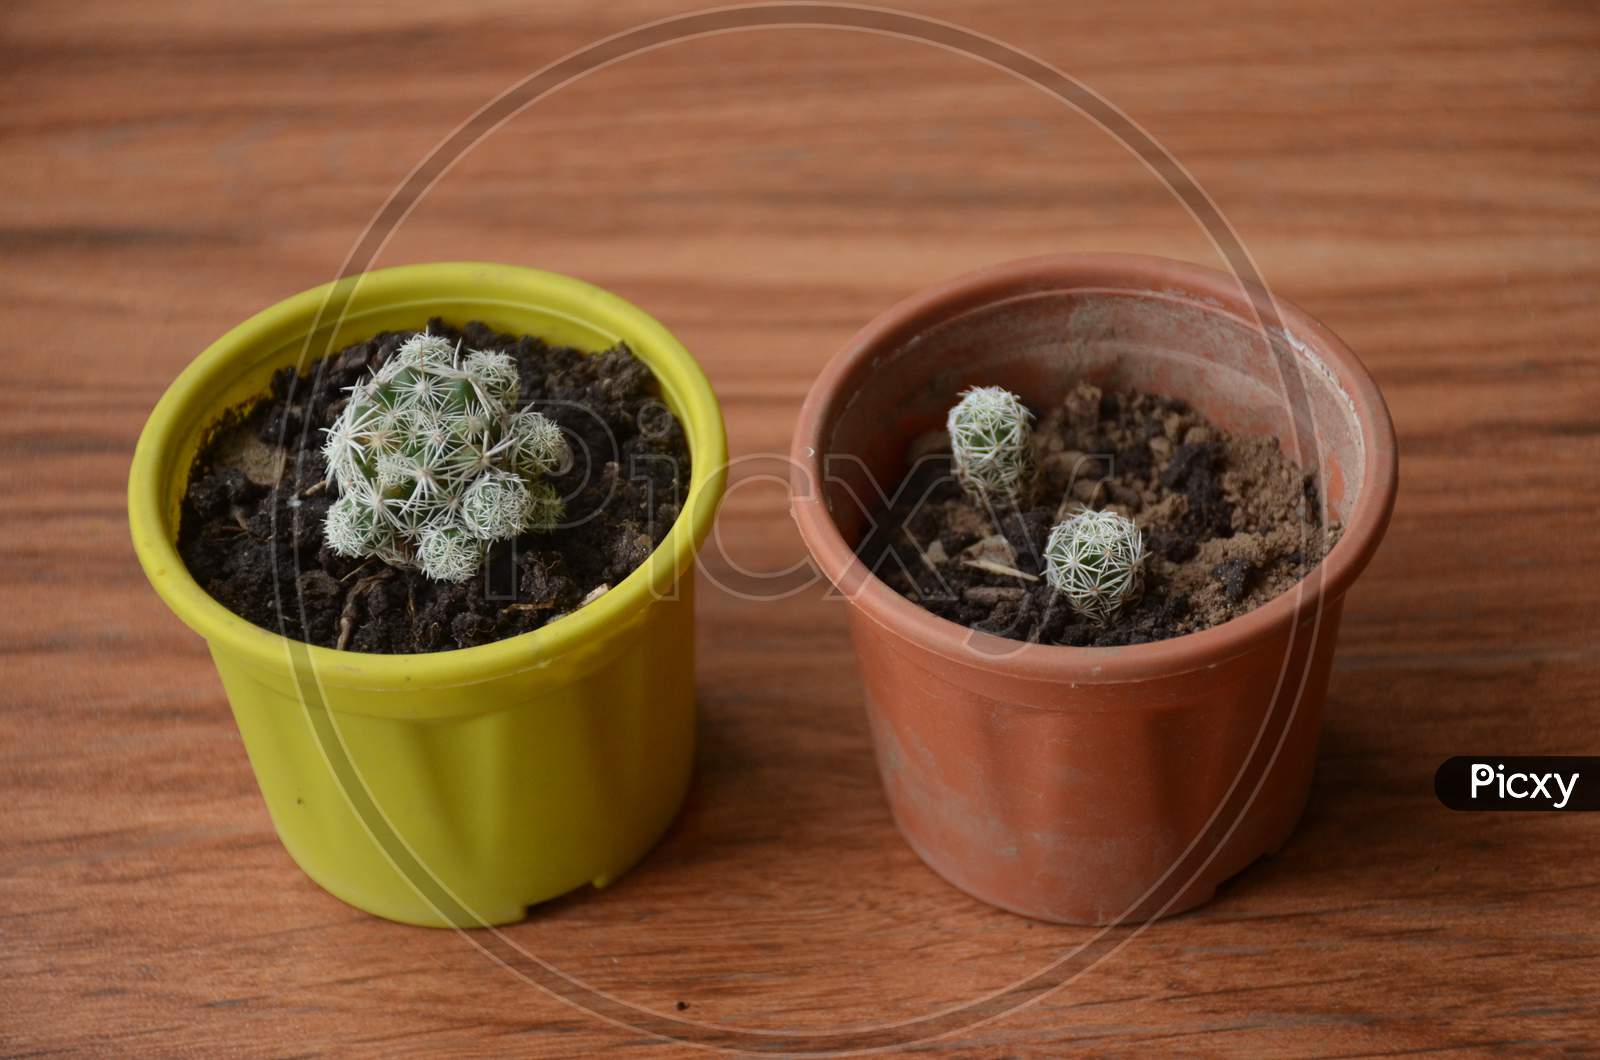 The Beautiful Cactus Plant Seedlings In The Two Small Pots.